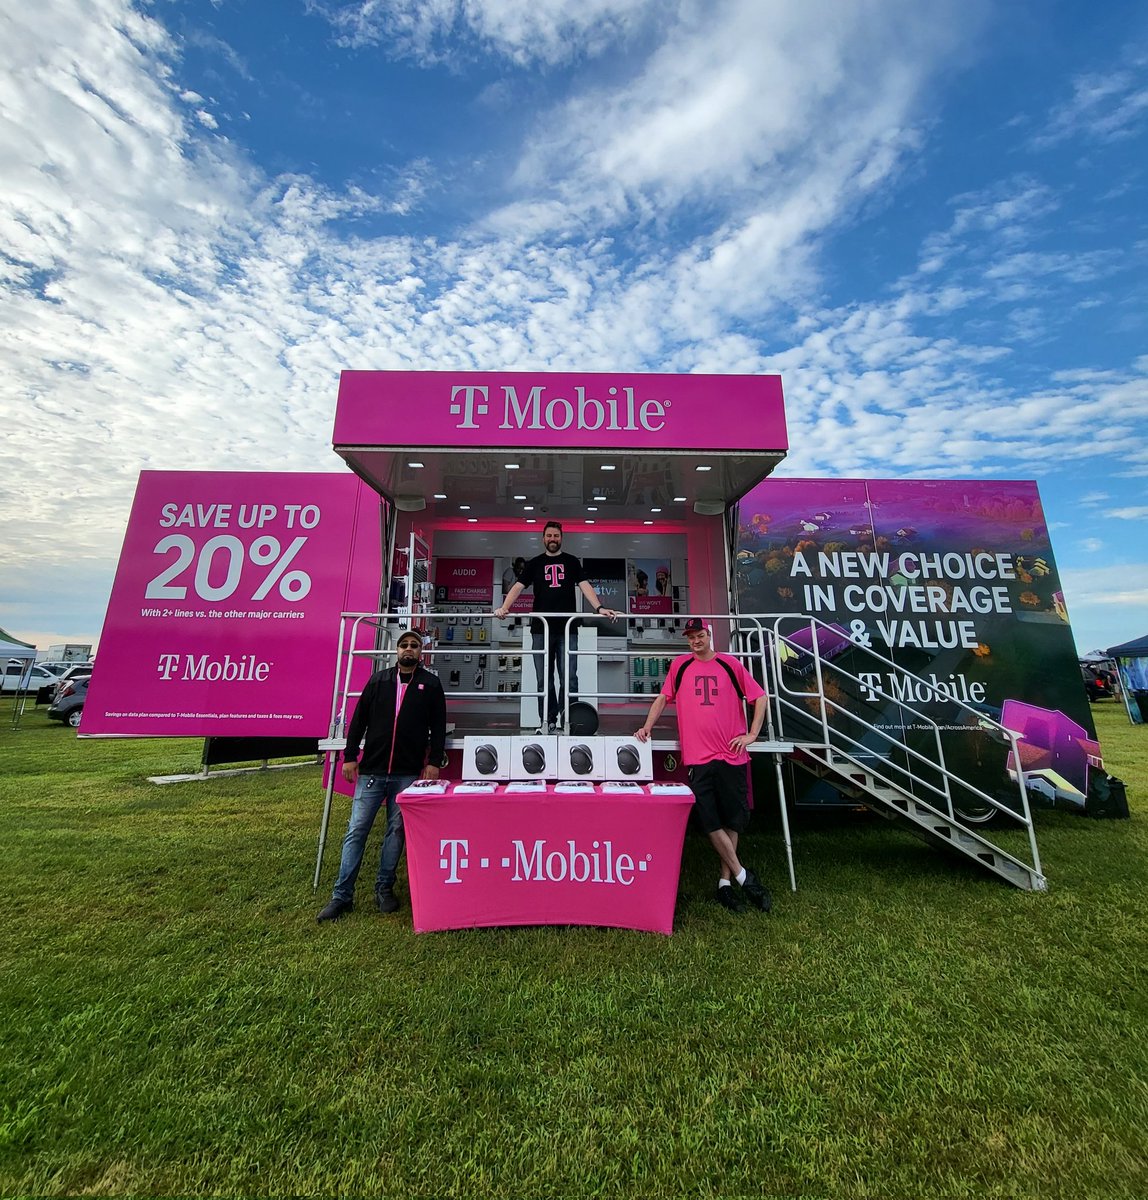 @TMoTruckSouthNJ ready to get our fly on! ✈ We're at the Millville Airshow today and tomorrow. Come and say hi to our wonderful HTE team 👋

#NewHometownNetwork #HometownExclusive #SmallMarketRuralArea #5GForALL